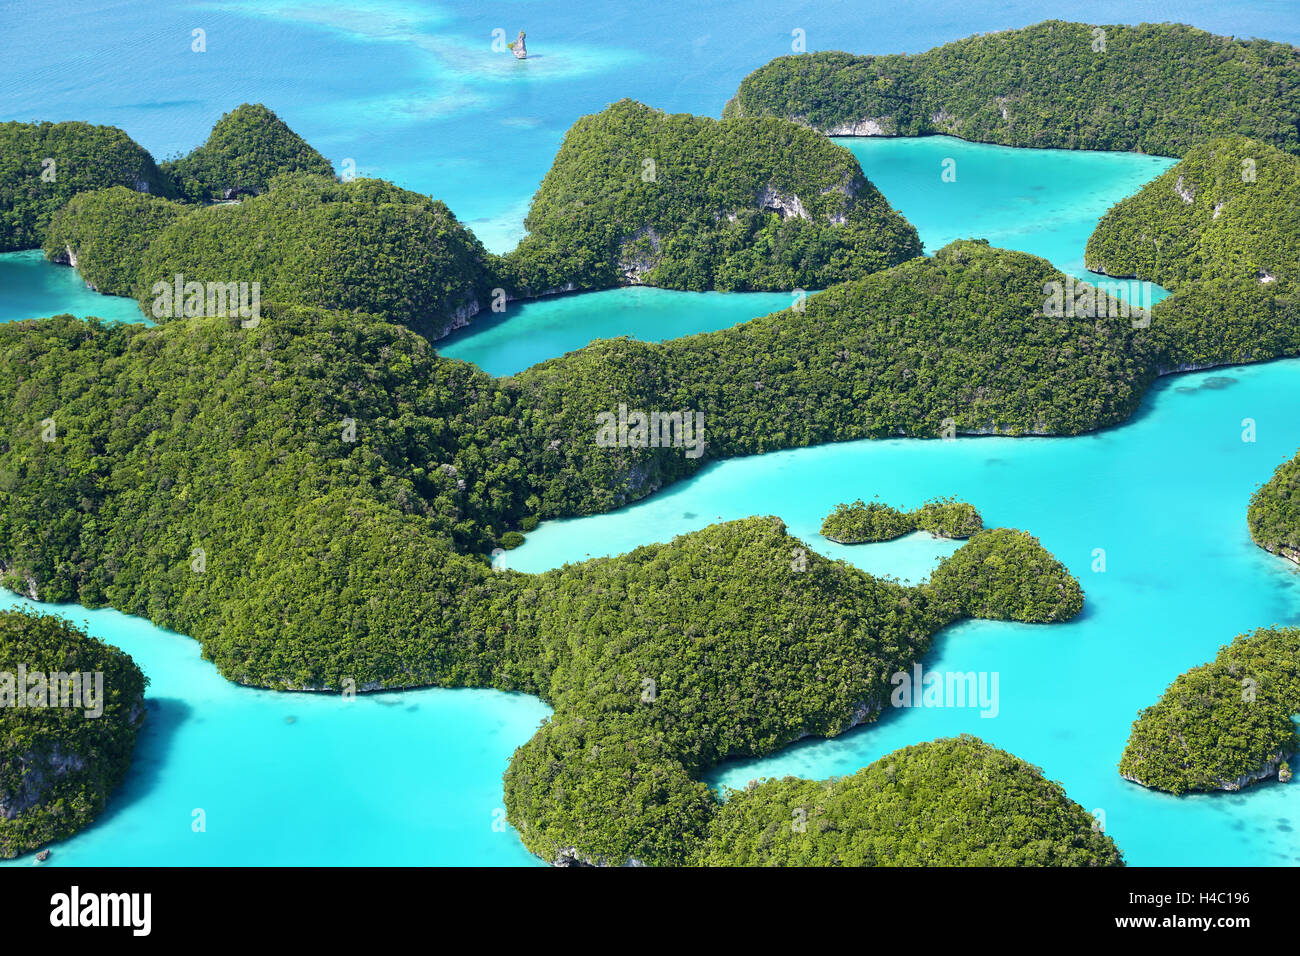 Aerial view of the archipelago of Seventy Islands, Republic of Palau, Micronesia, Pacific Ocean Stock Photo